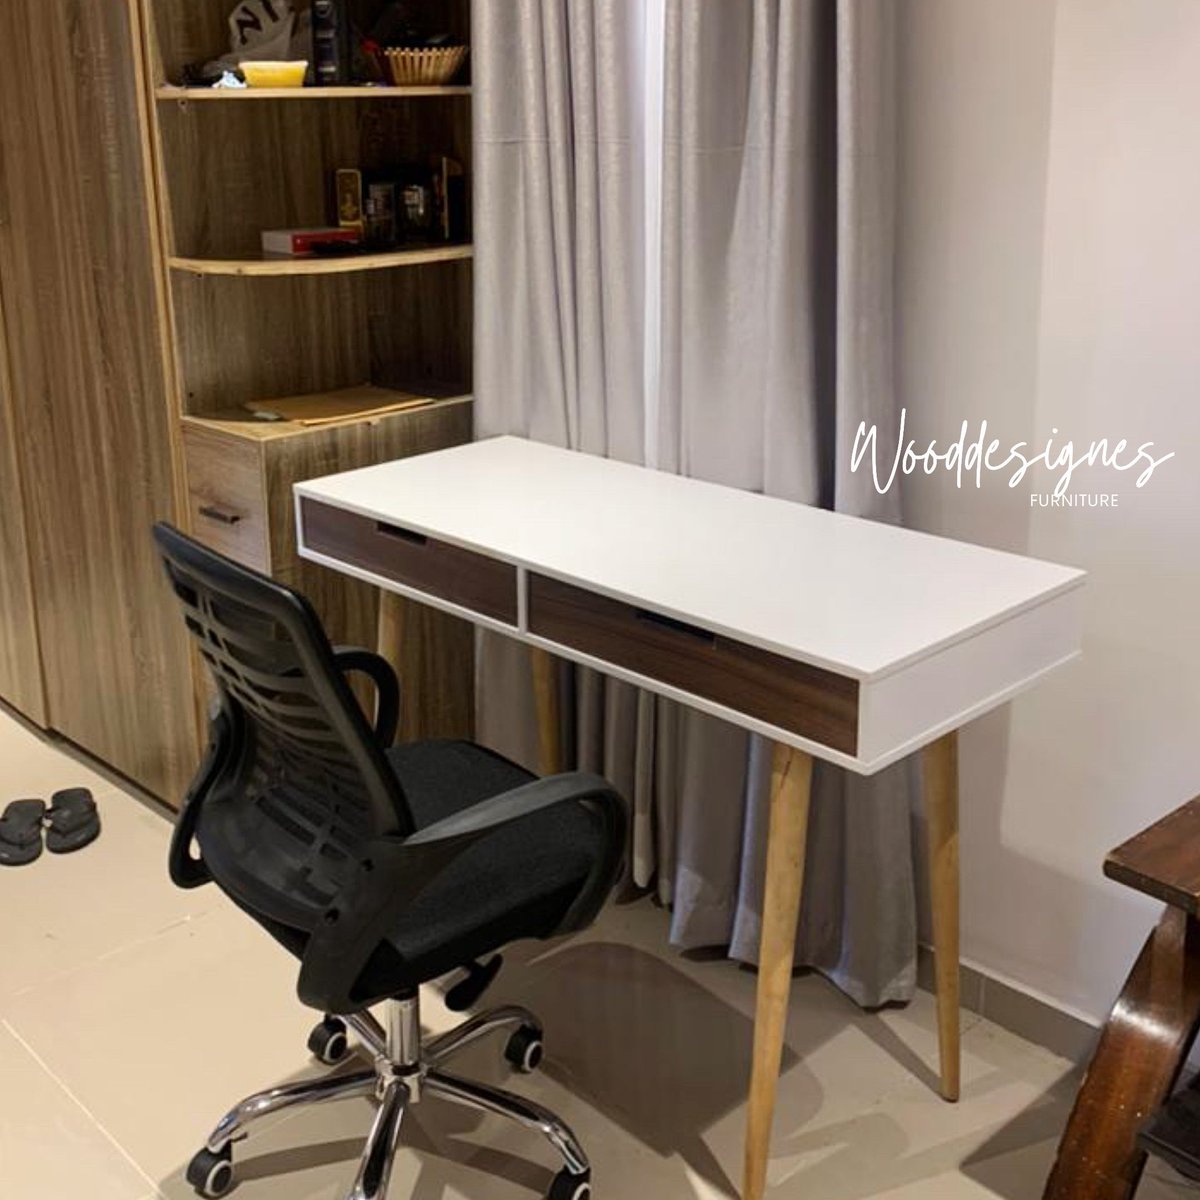 Did you know the Cara can also be used as a console?
A bestseller! 😎
Cara Multipurpose Table
Price: N69,900

Swivel Chair
Price: N42,000

#wooddesignes #worktable #console #cara #workright